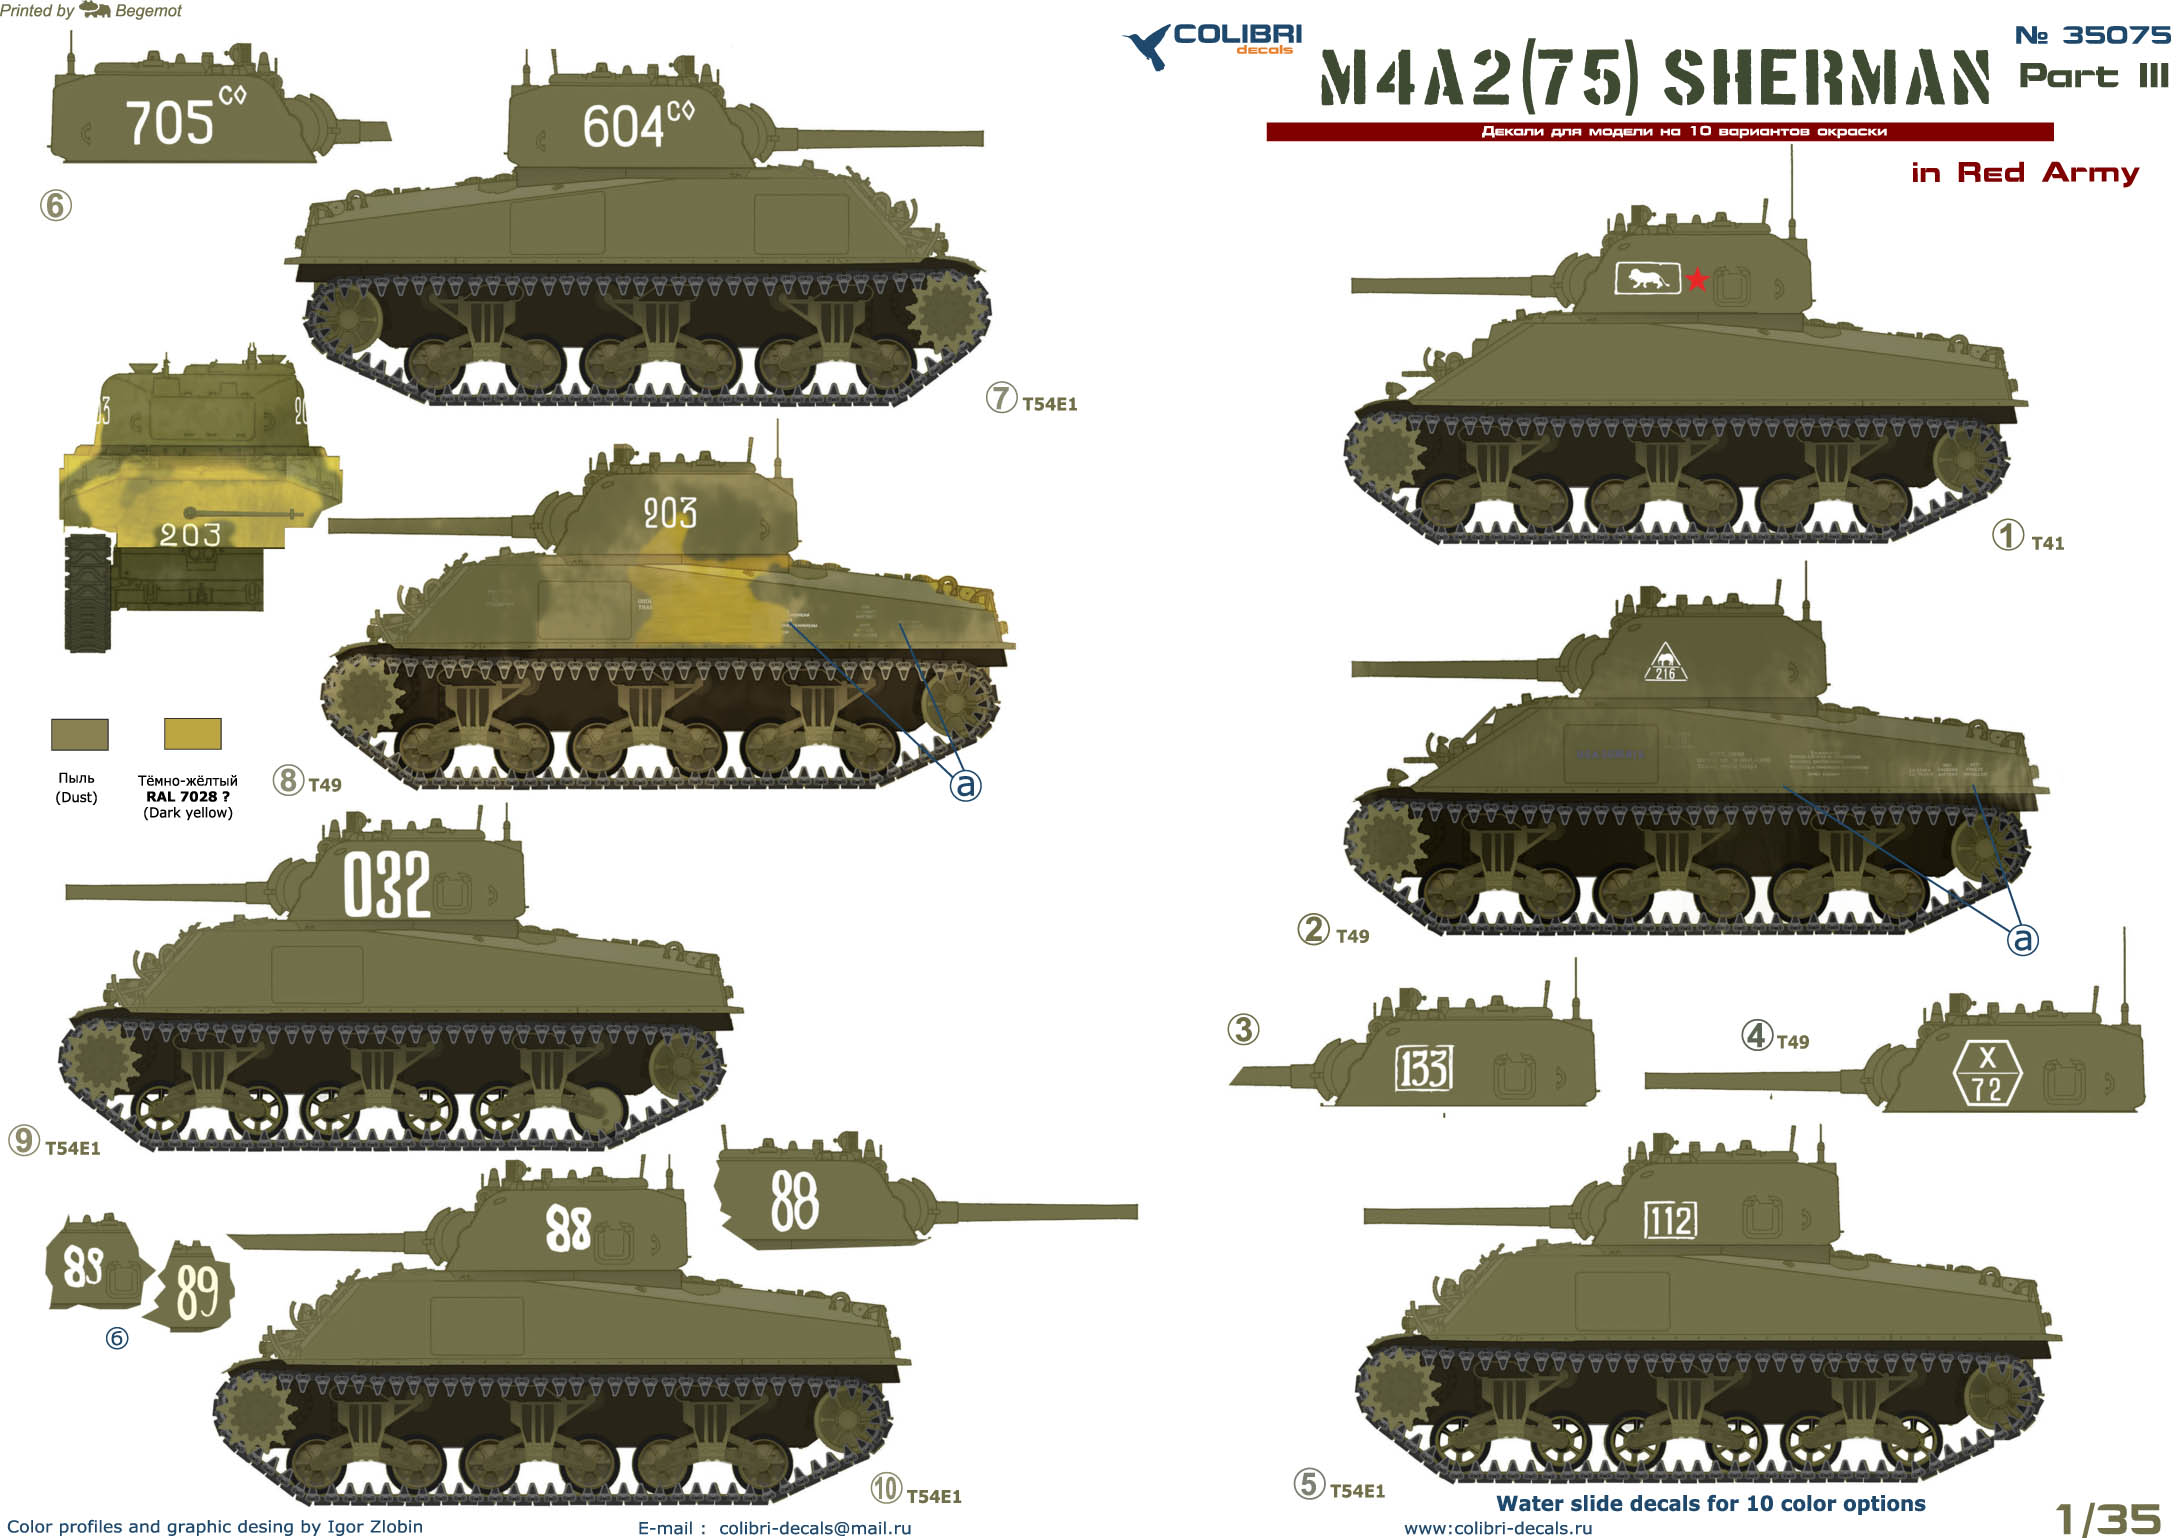 Decal 1/35 M4A2 Sherman (75) - in Red Army III (Colibri Decals)